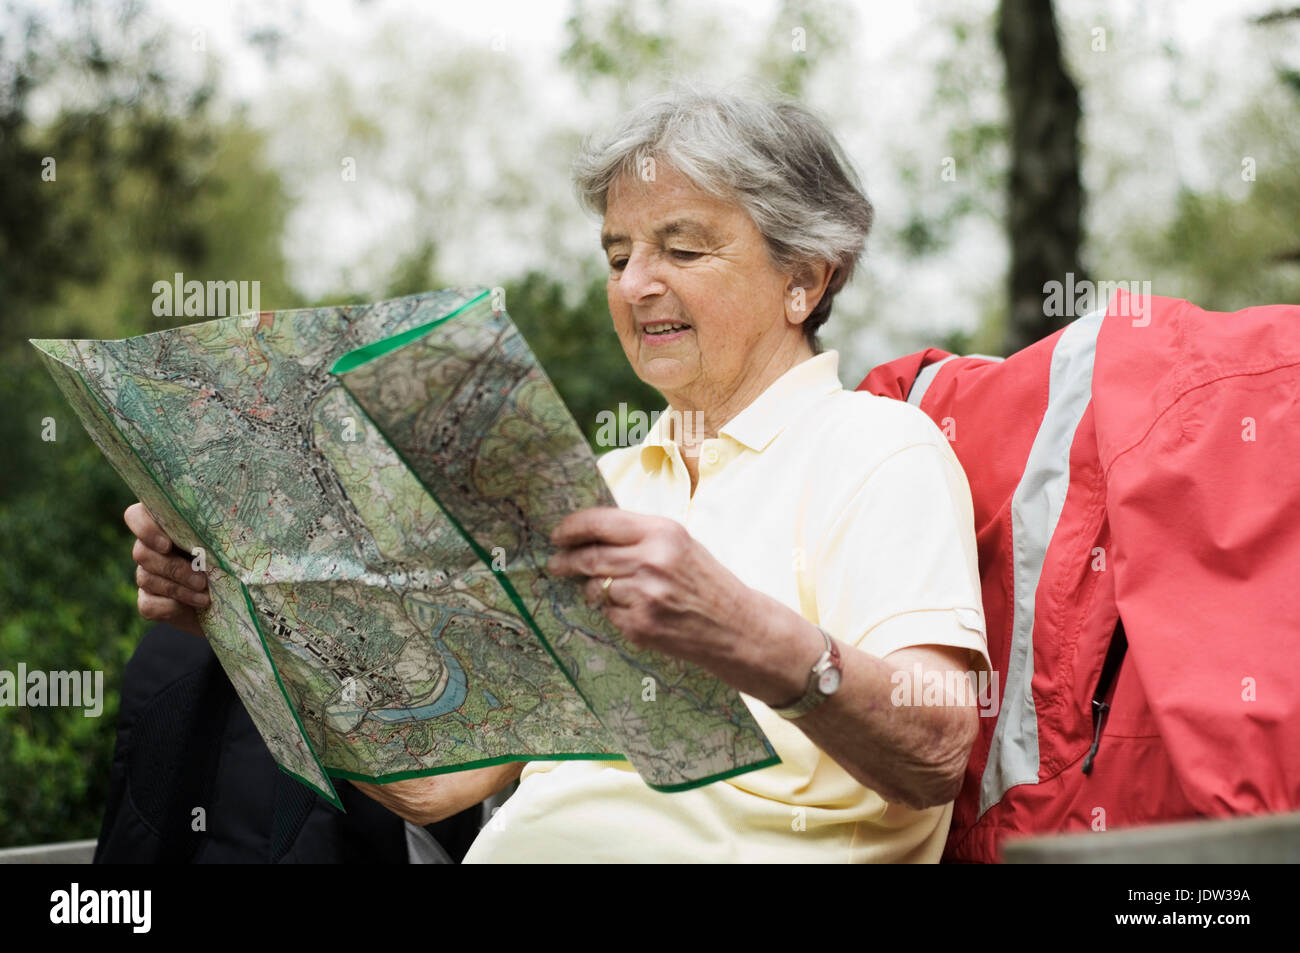 Older woman reading map in park Stock Photo